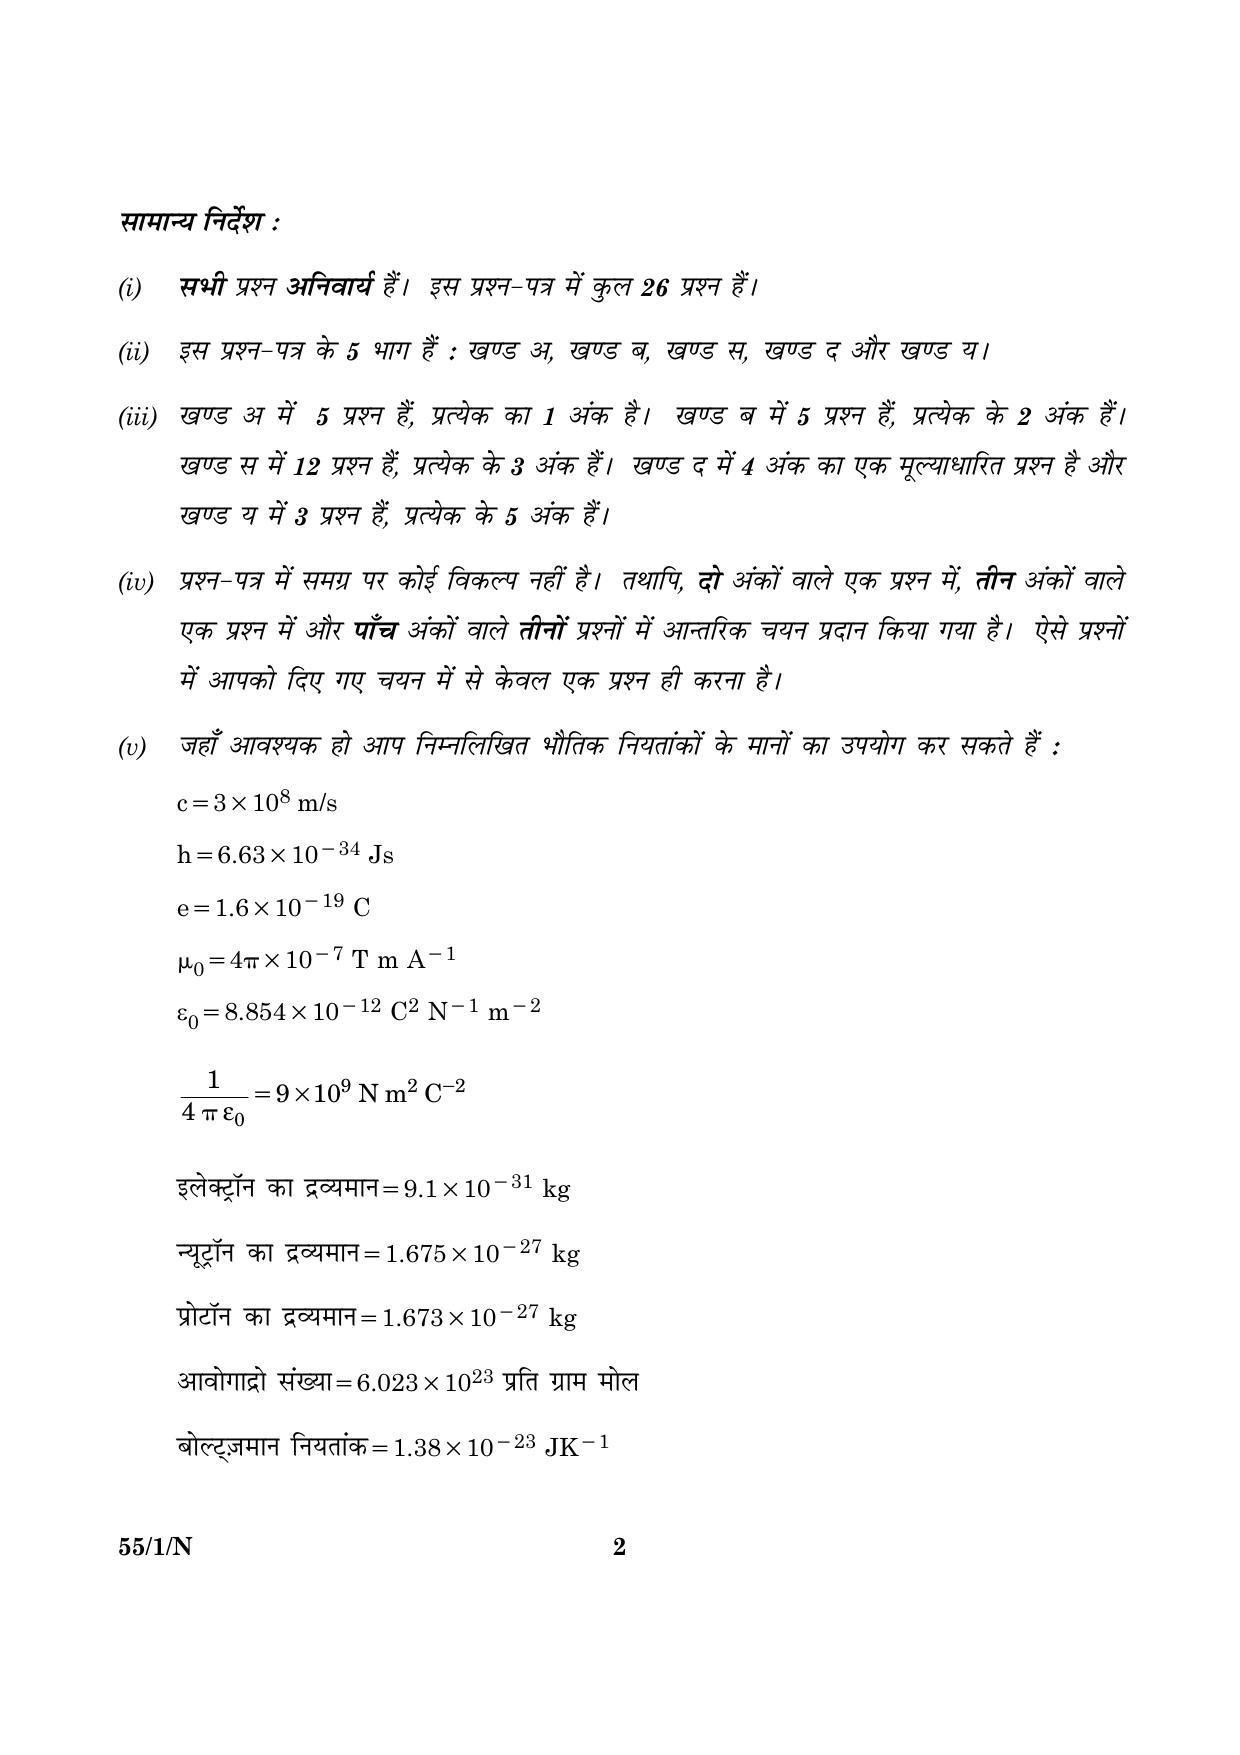 CBSE Class 12 055 Set 1 N Physics Theory 2016 Question Paper - Page 2